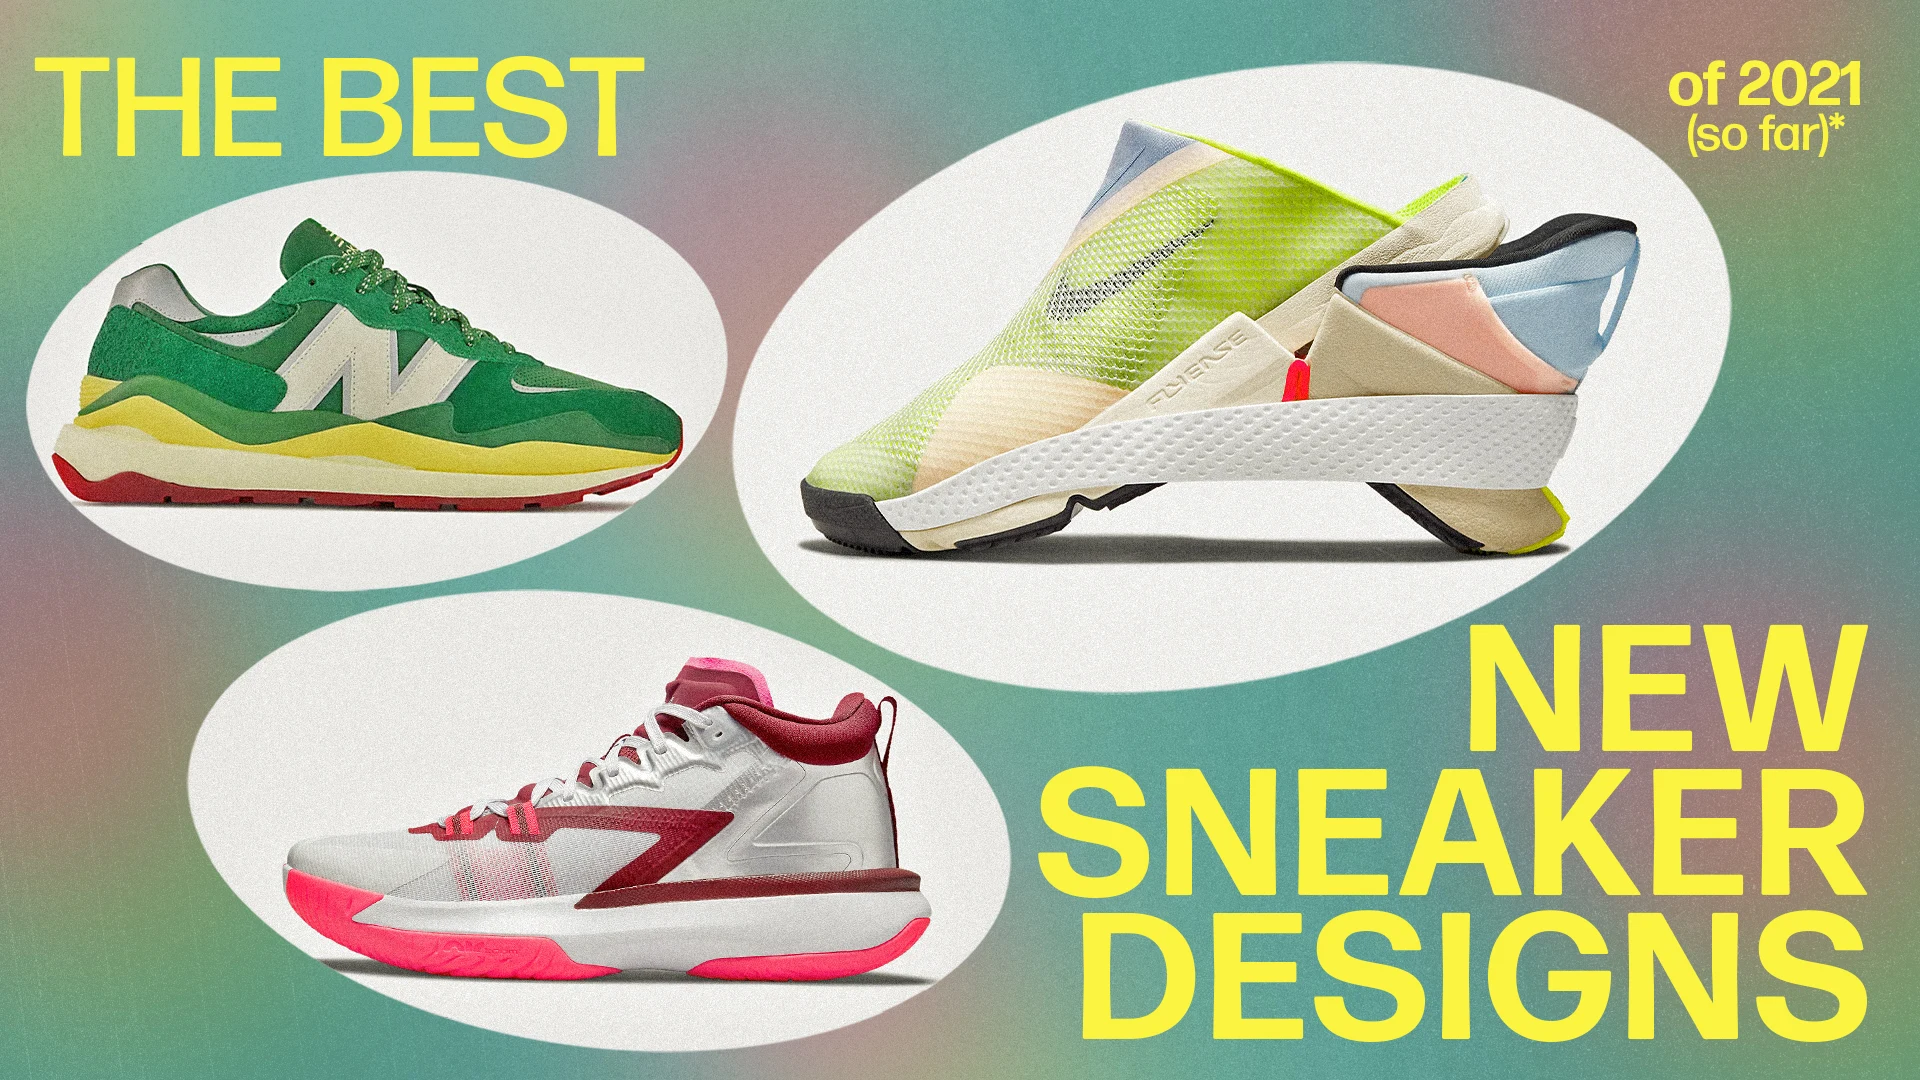 The Best New Sneaker Designs of 2021